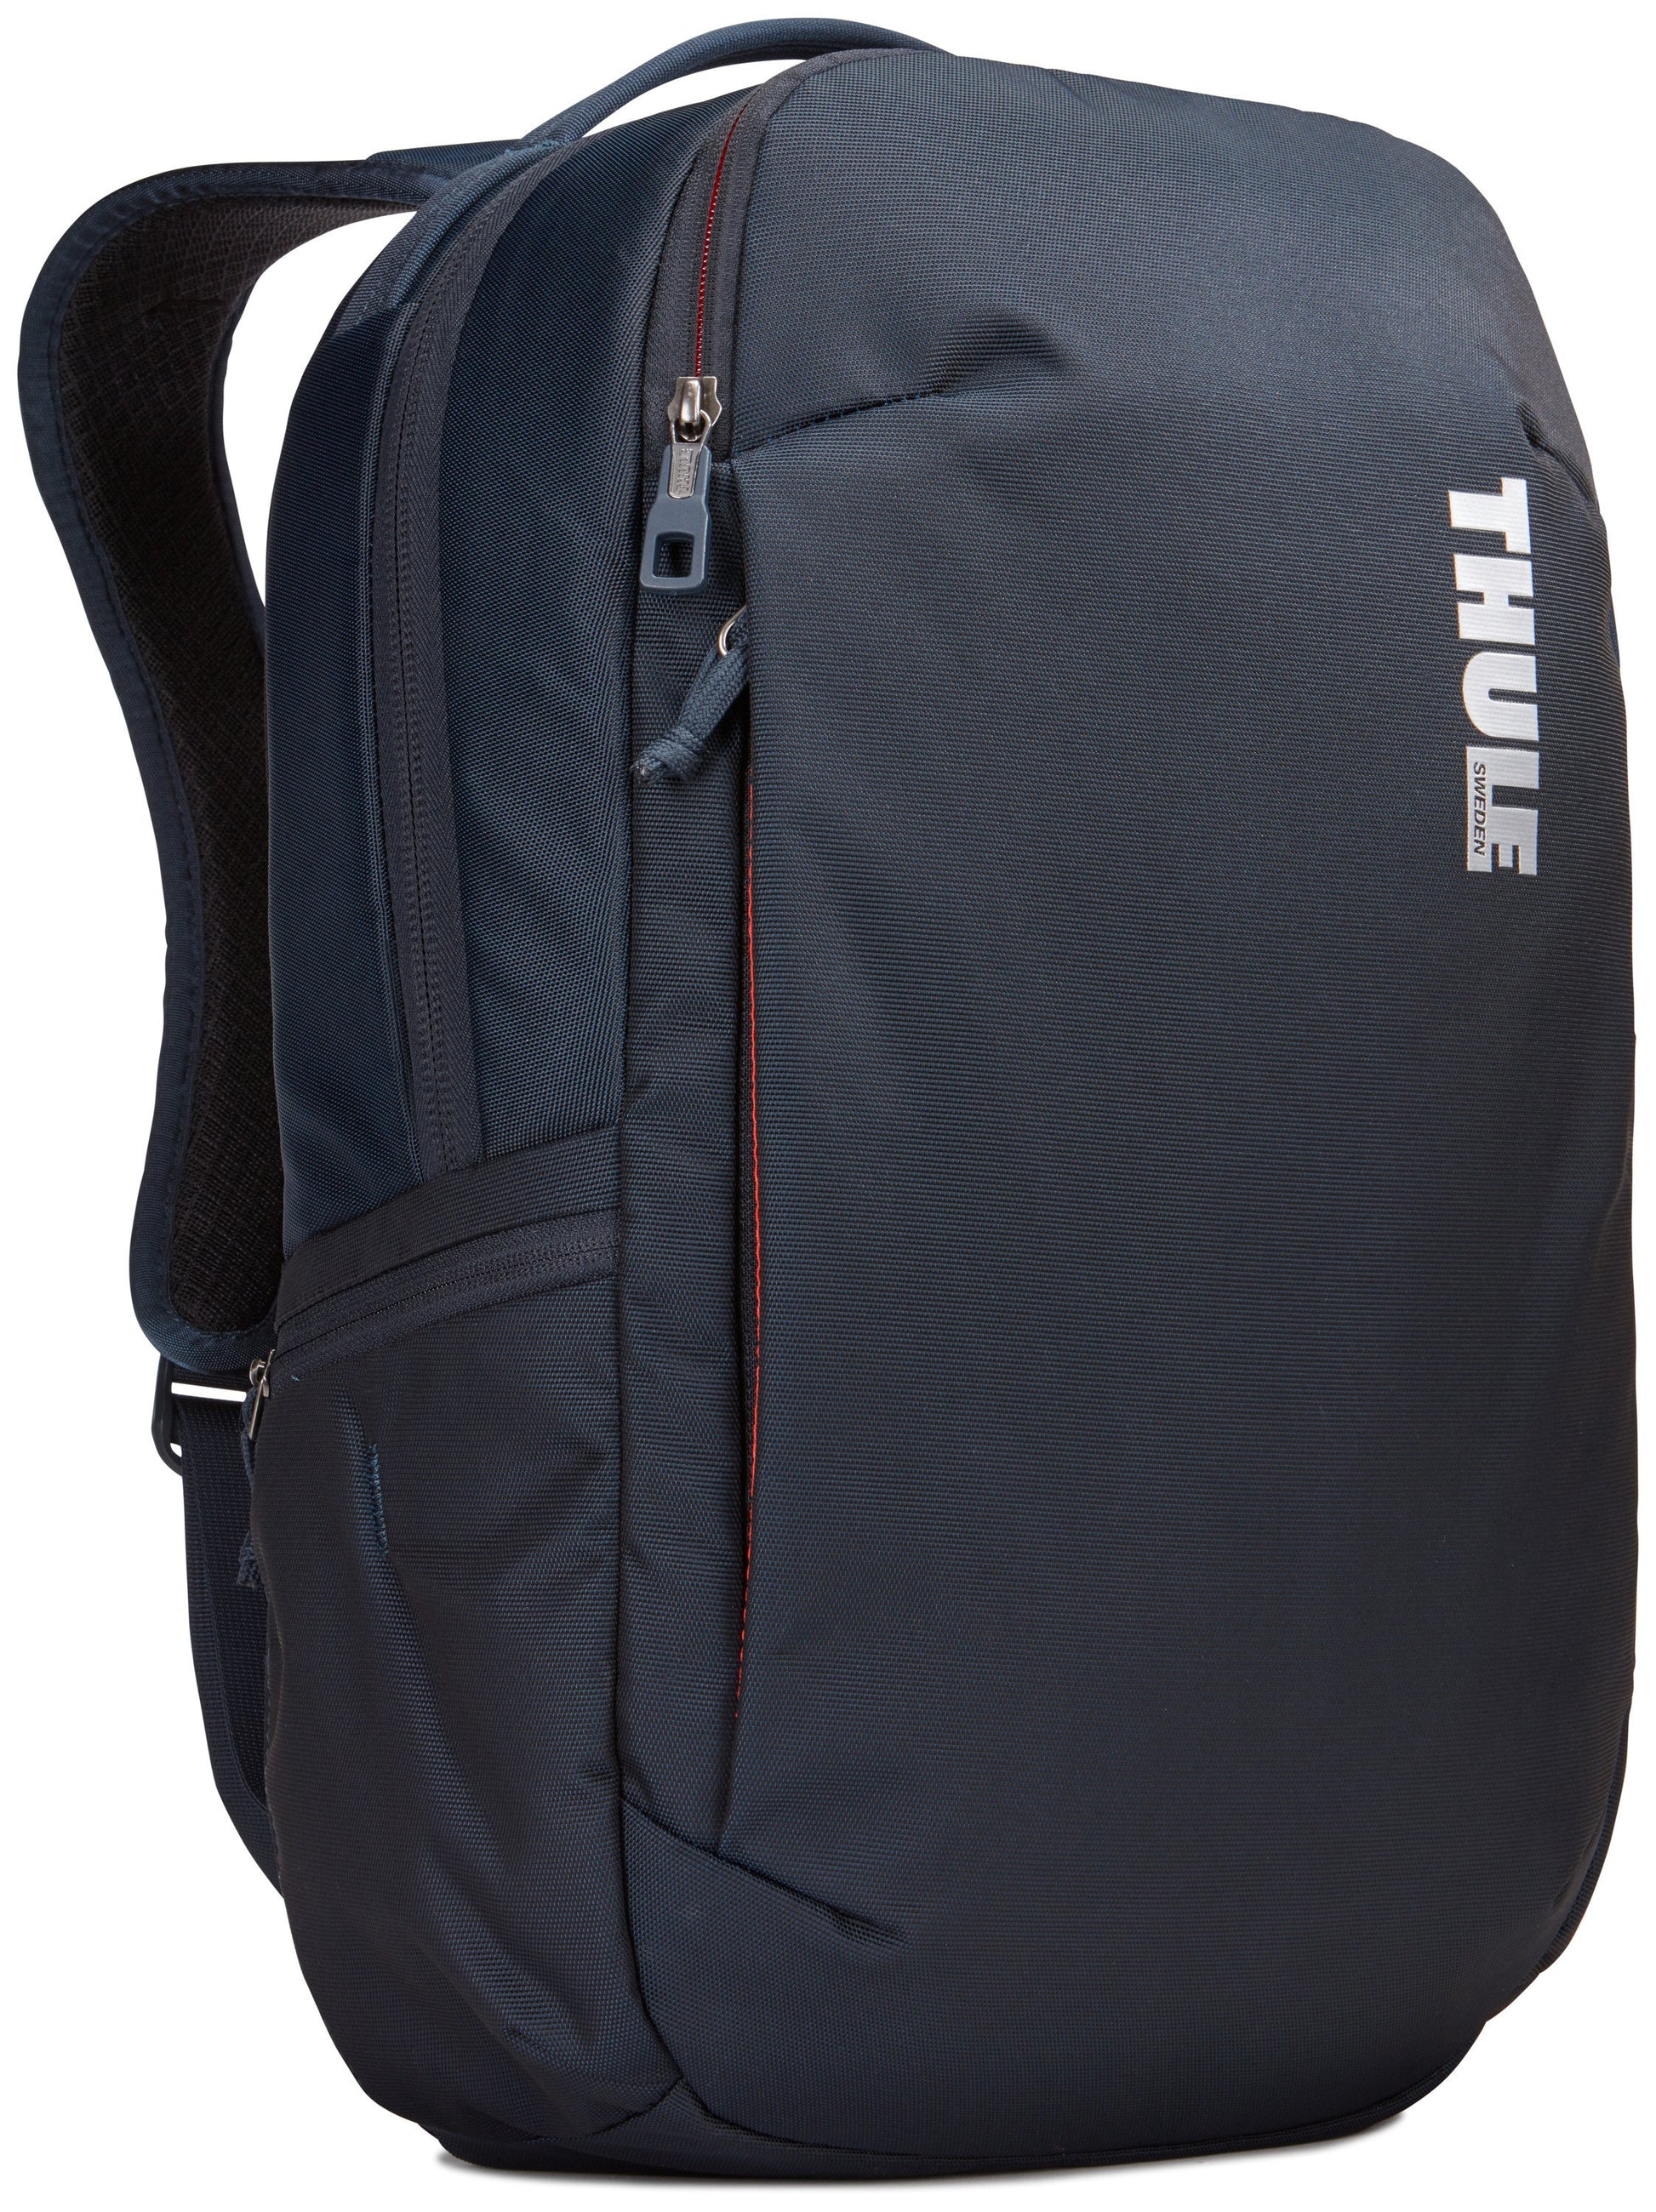 Thule Subterra 23L Laptop Backpack - Mineral